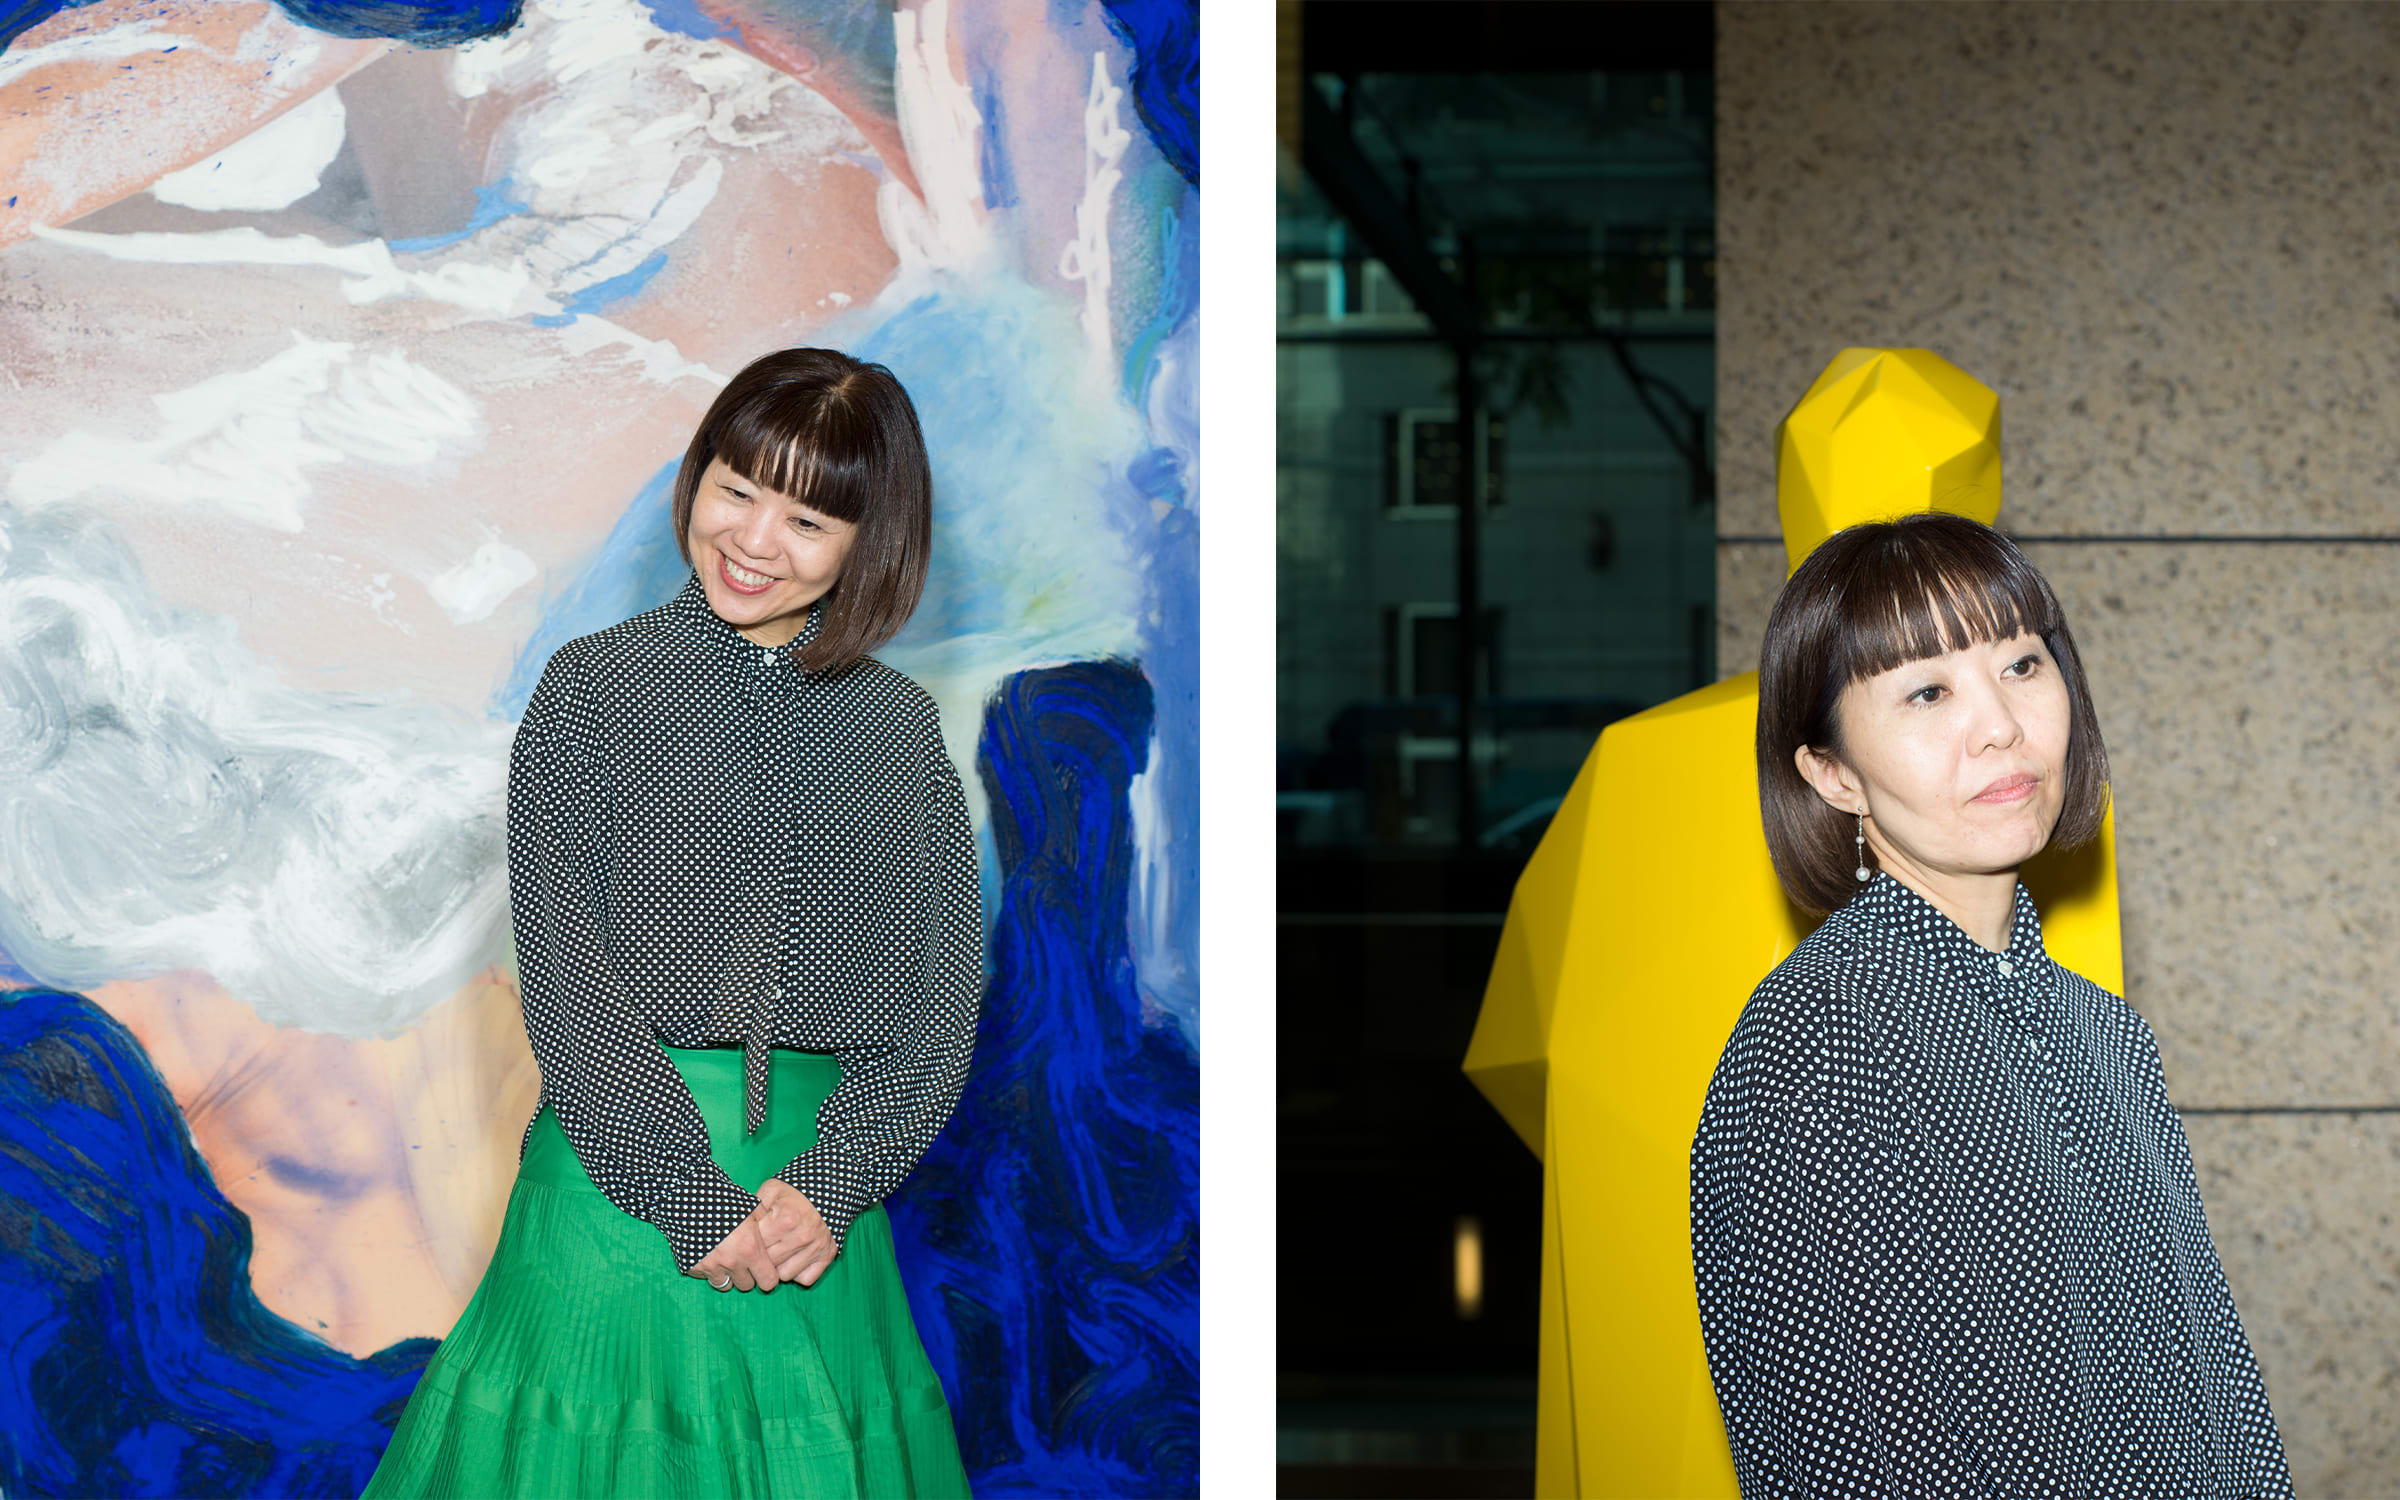 Miwa Taguchi in front of Donna Huanca's work HANGISI (2017, left) and Xavier Veilhan's work Manfredi (2018-2019, right). Both works are currently on view in 'SMBC meets Contemporary Art “Come take a look!”', Sumitomo Mitsui Banking Corporation East Building, Tokyo, February 2022. Photo by Christoffer Rudquist for Art Basel.